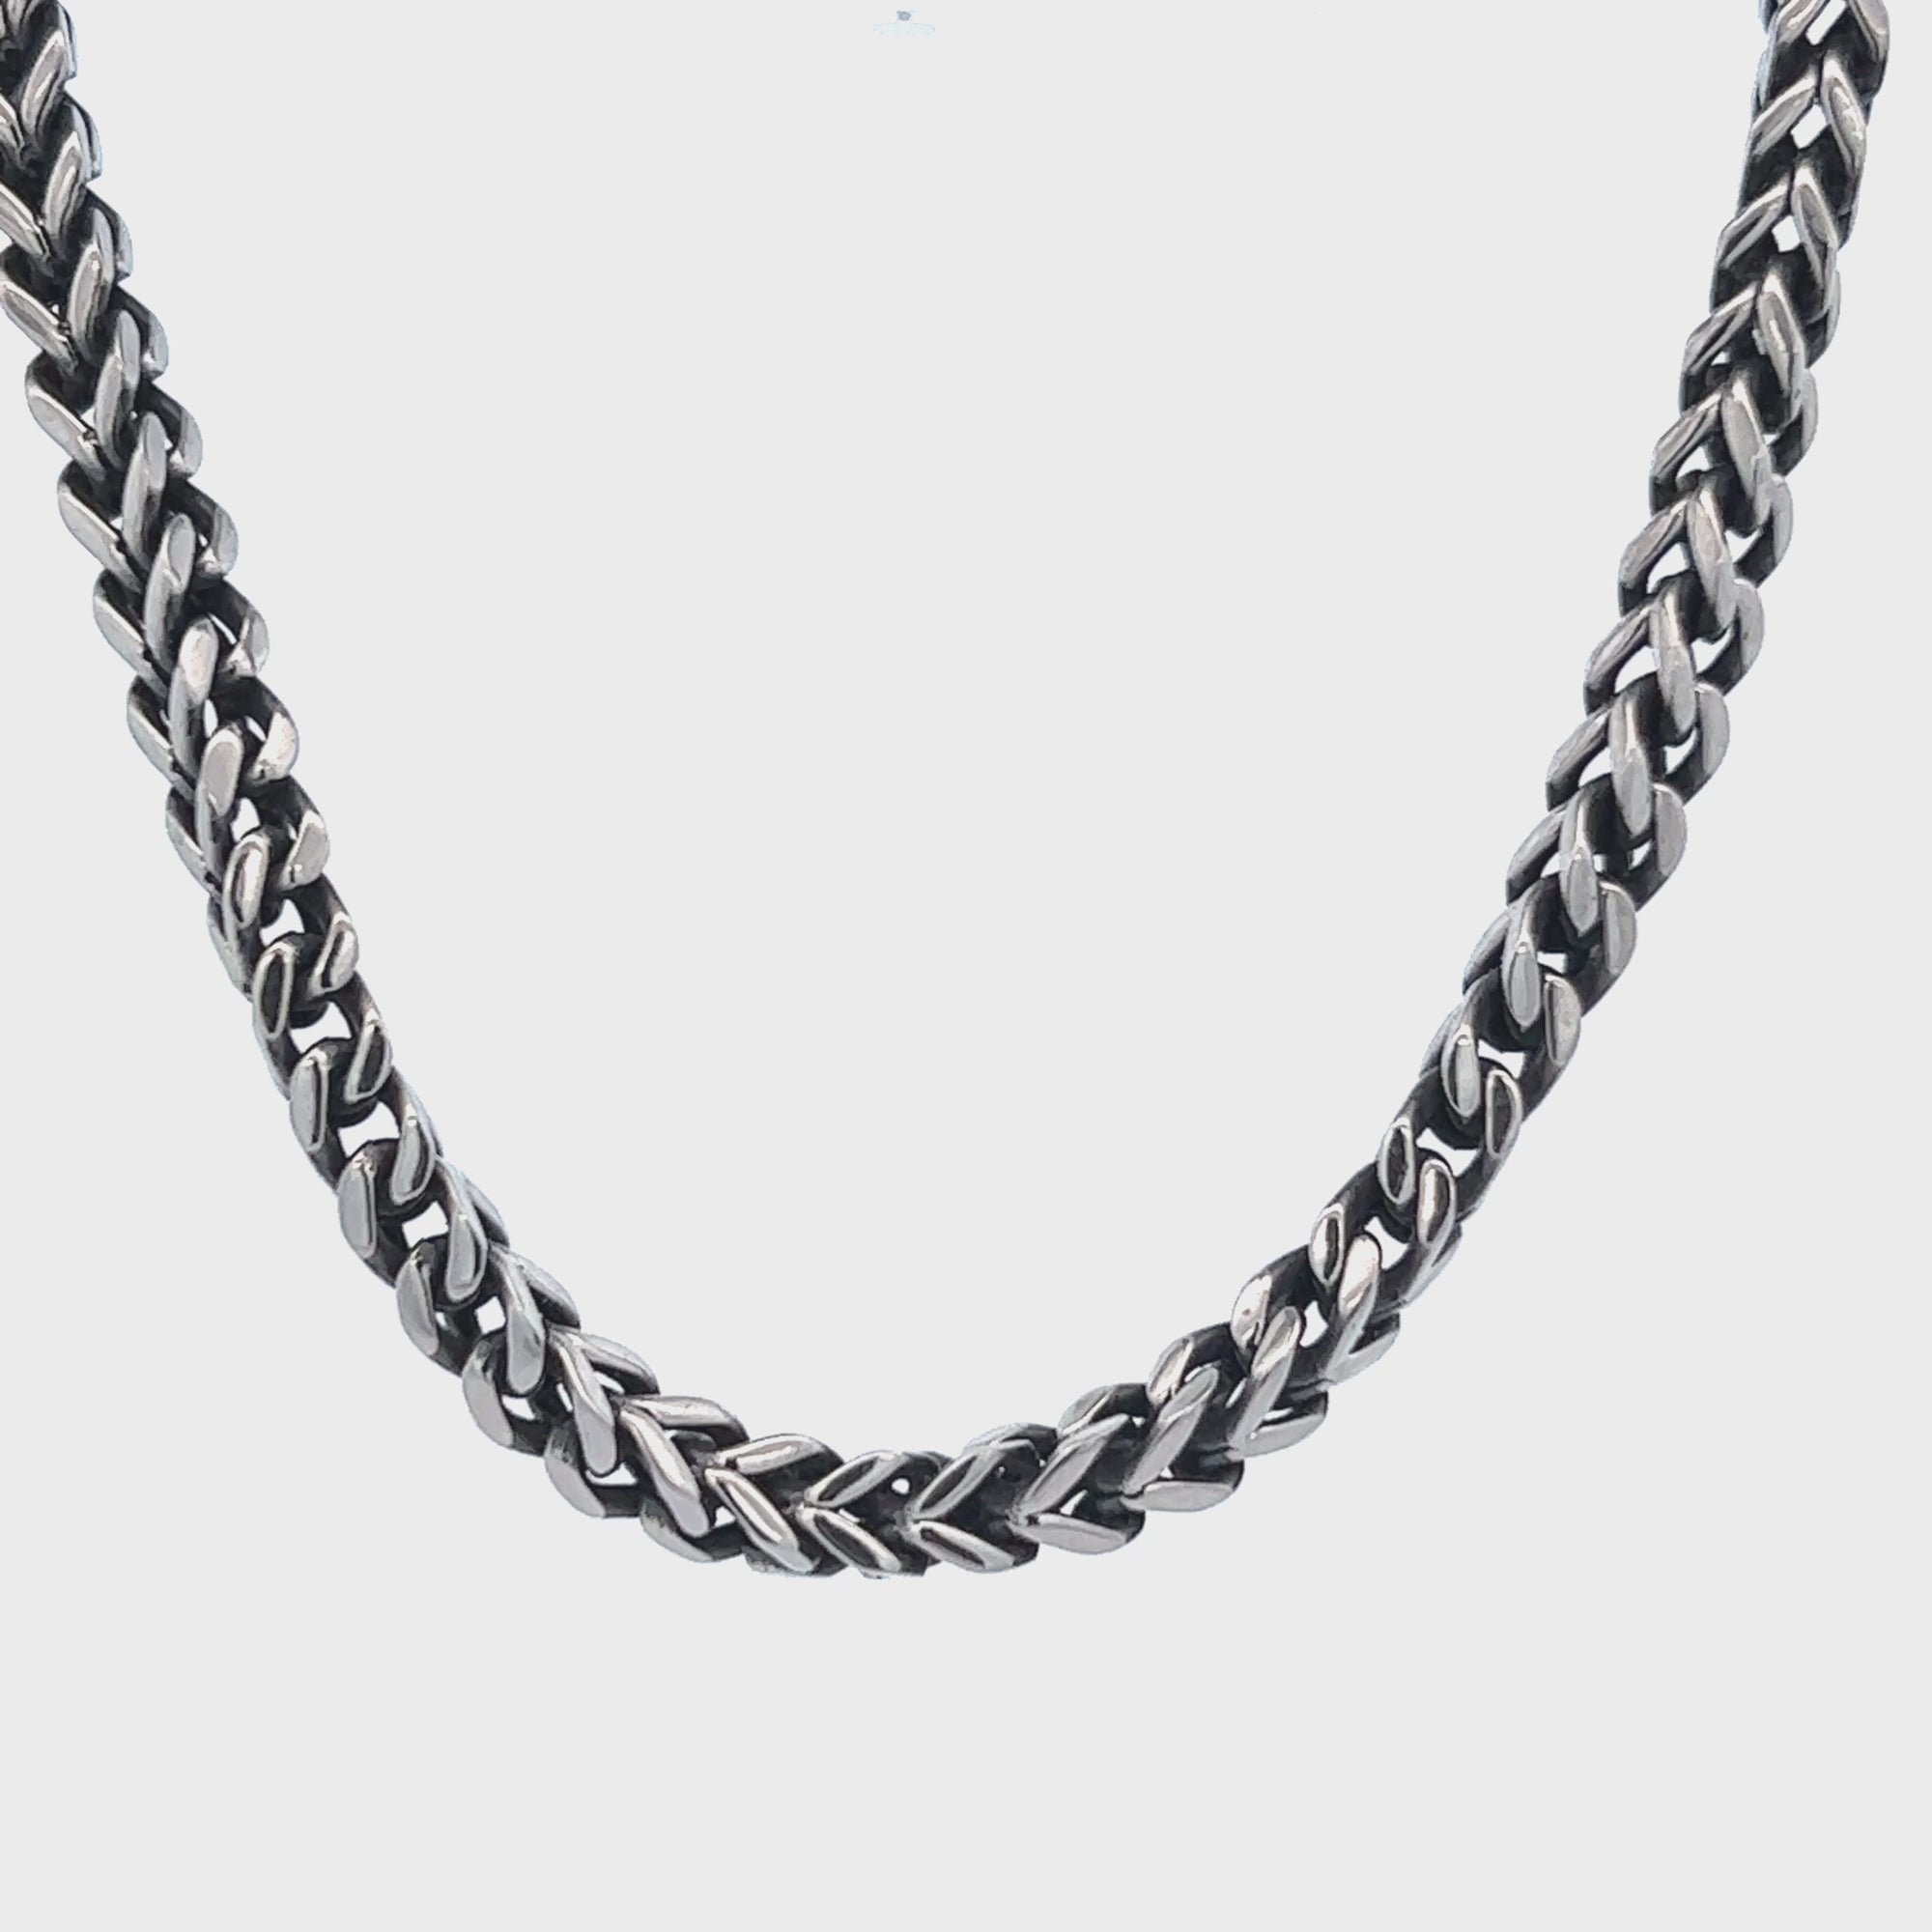 Antiqued Silver Tone Stainless Steel 5mm Franco Link Chain